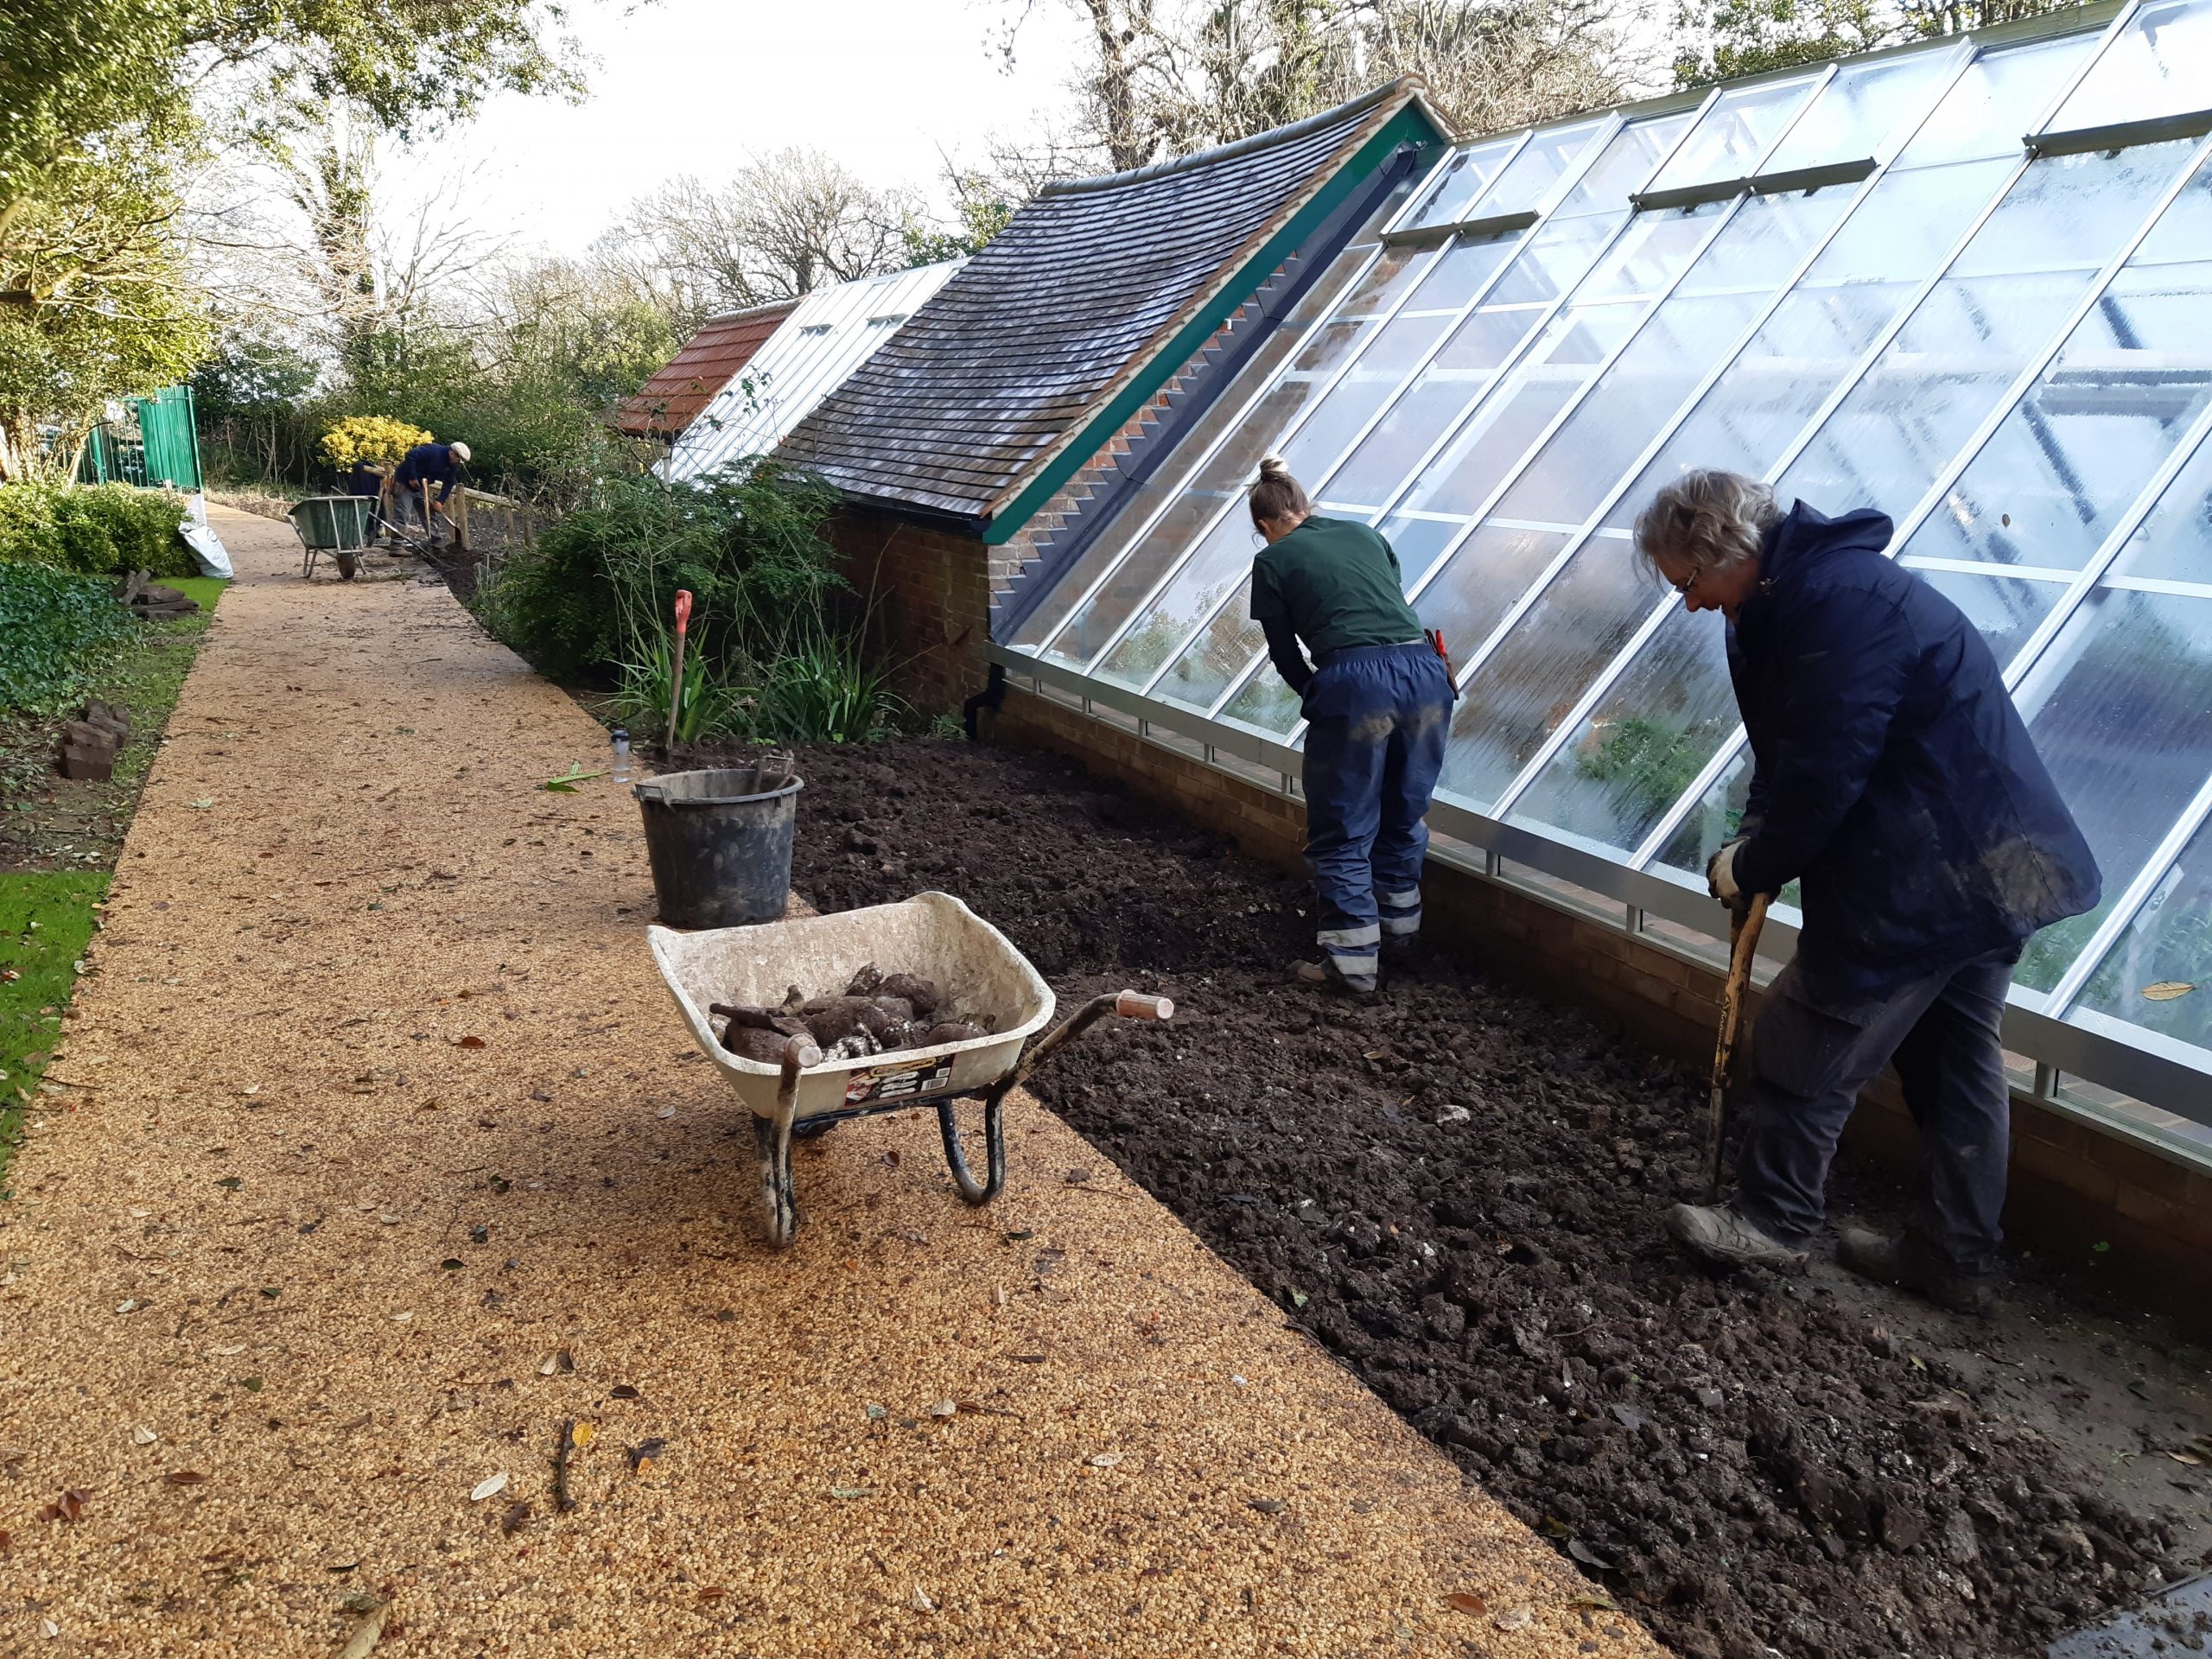 Digging new beds at new greenhouse January 2021. Photo by Worthing Borough Council